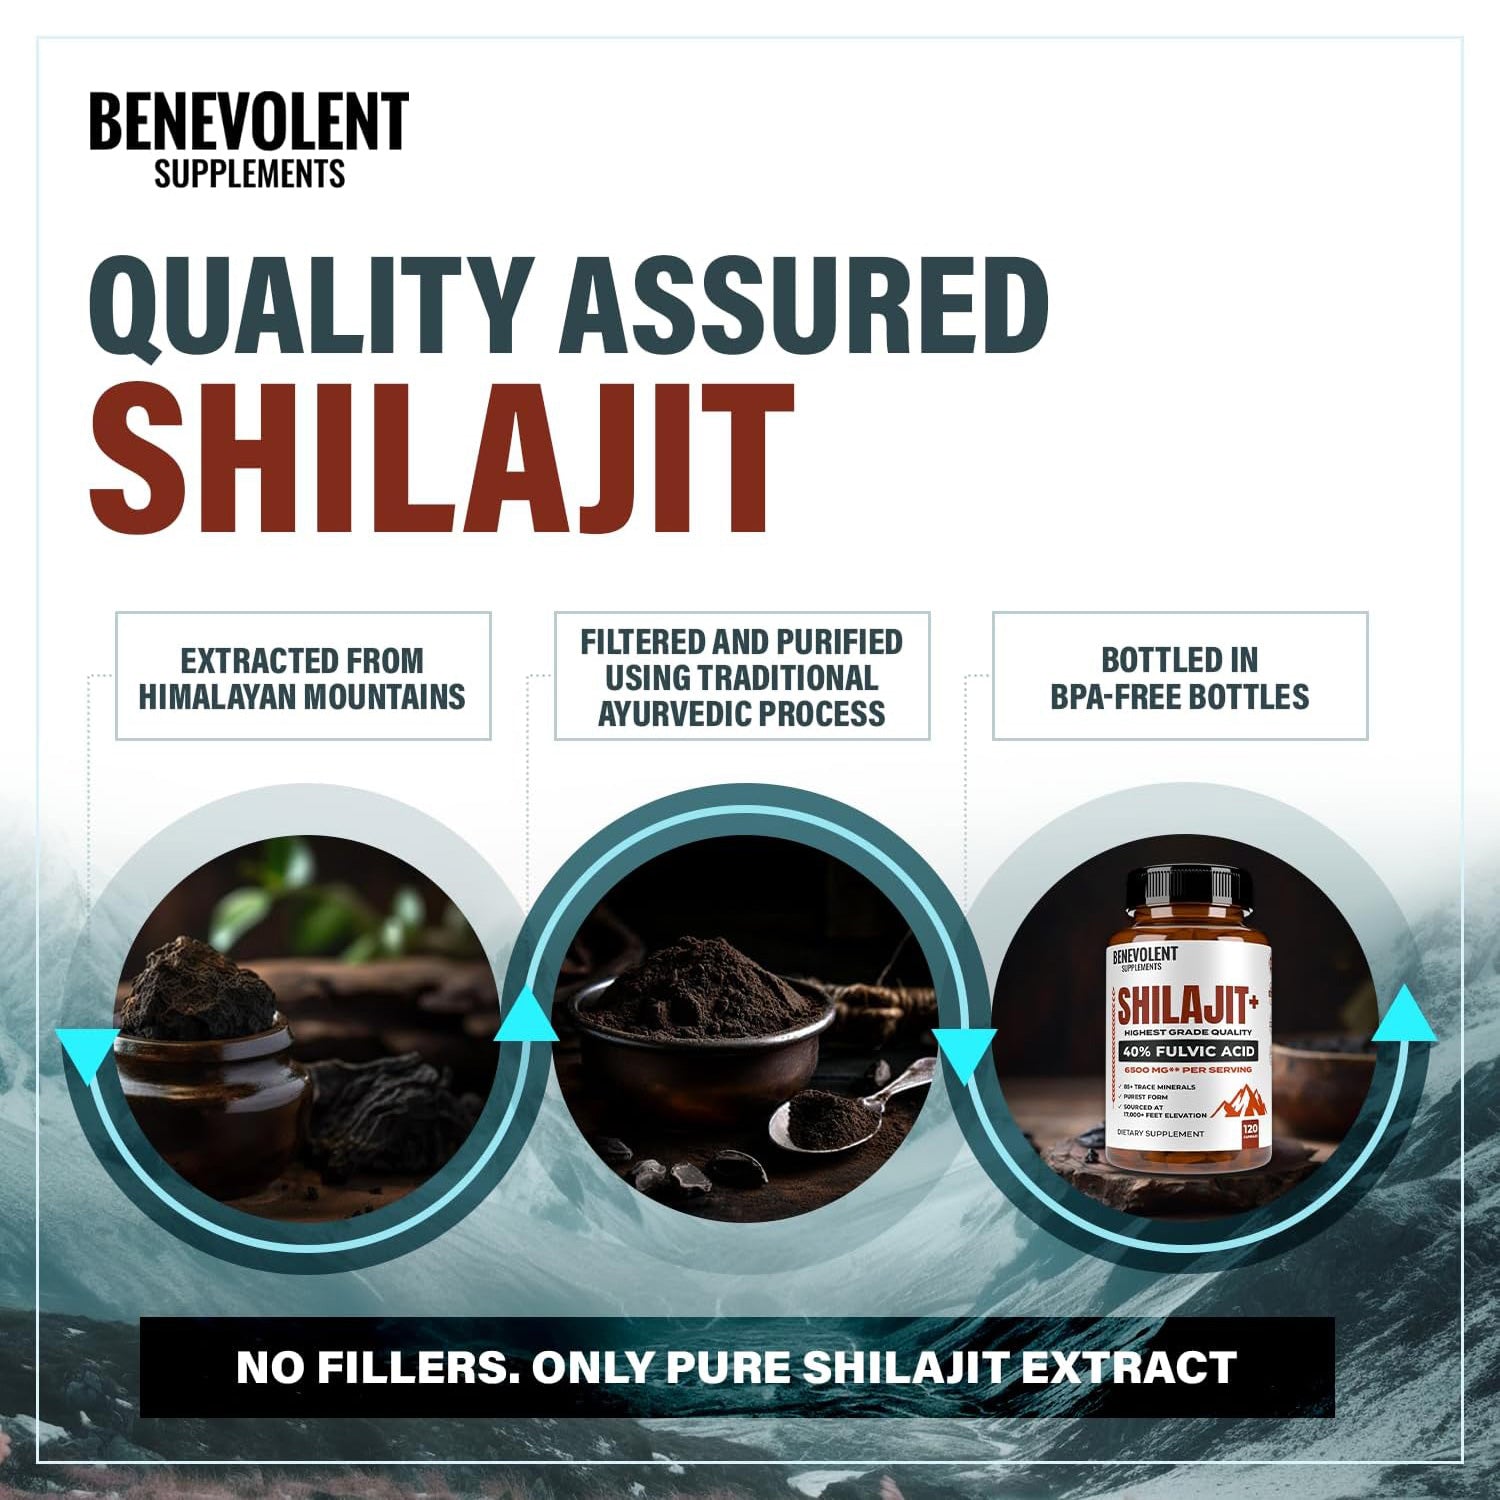 No fillers, only pure Shilajit extract